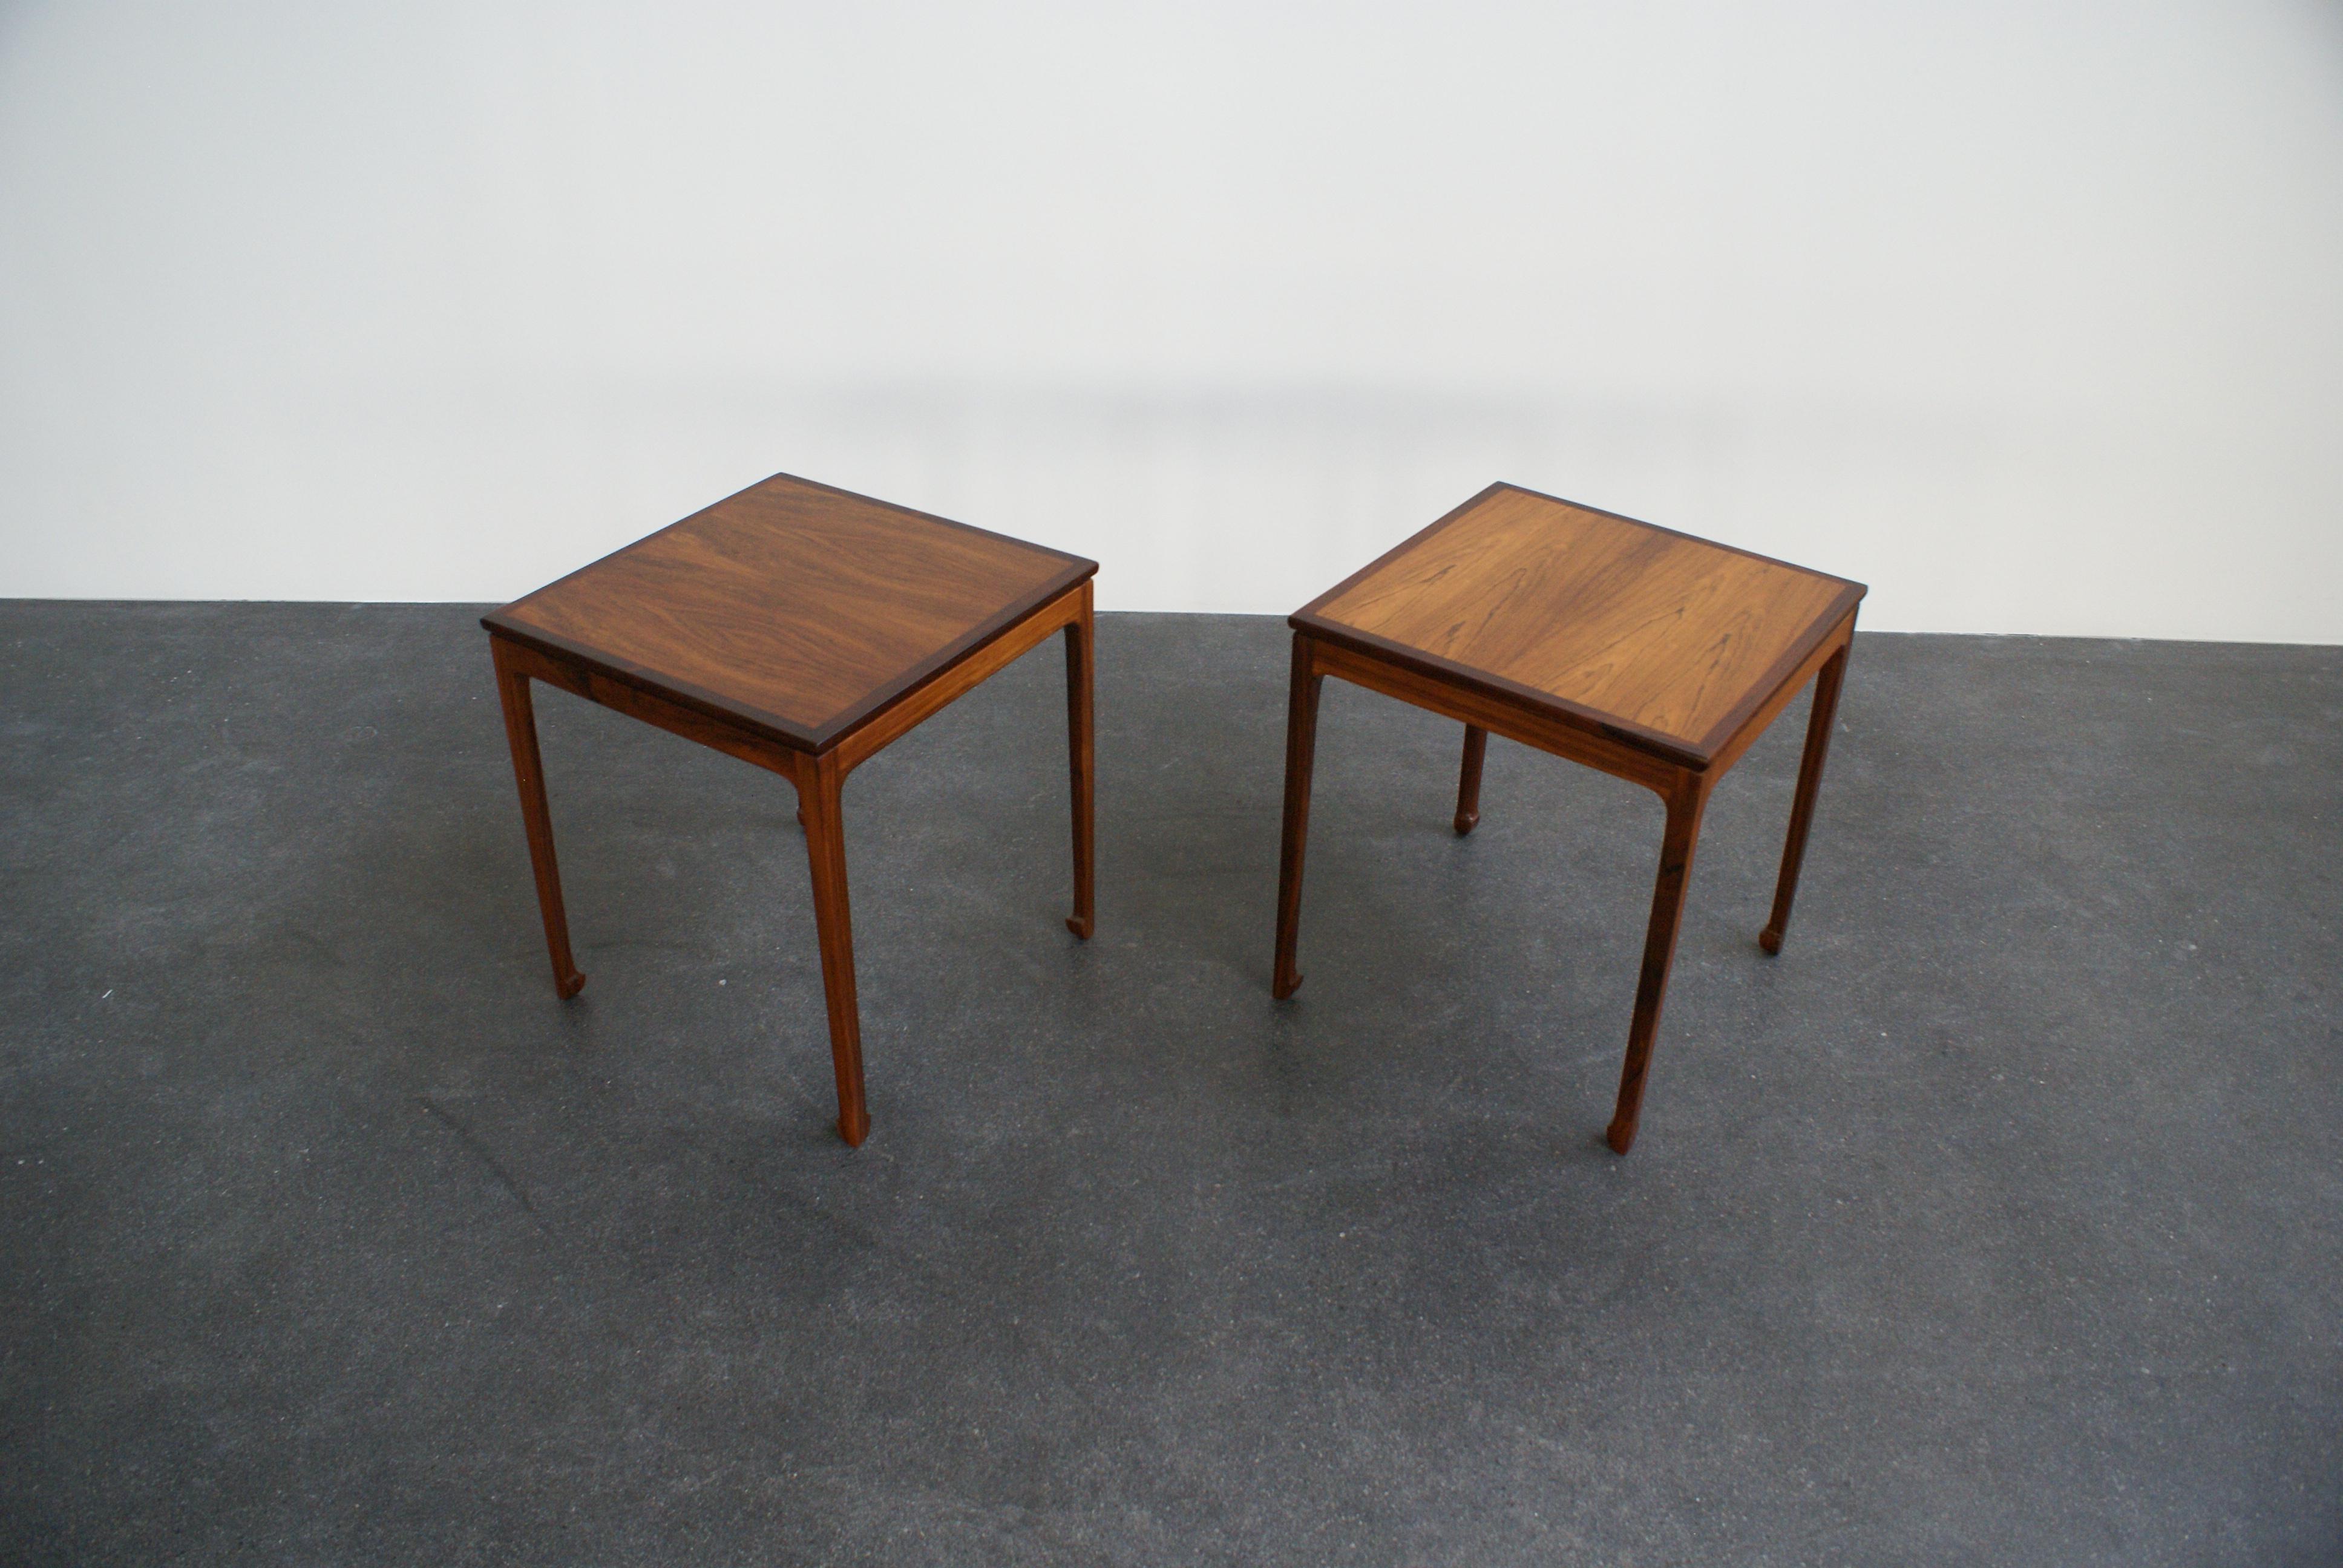 Ole Wanscher Pair of Side Tables in Brazilian Rosewood for A. J. Iversen, 1957 For Sale 7